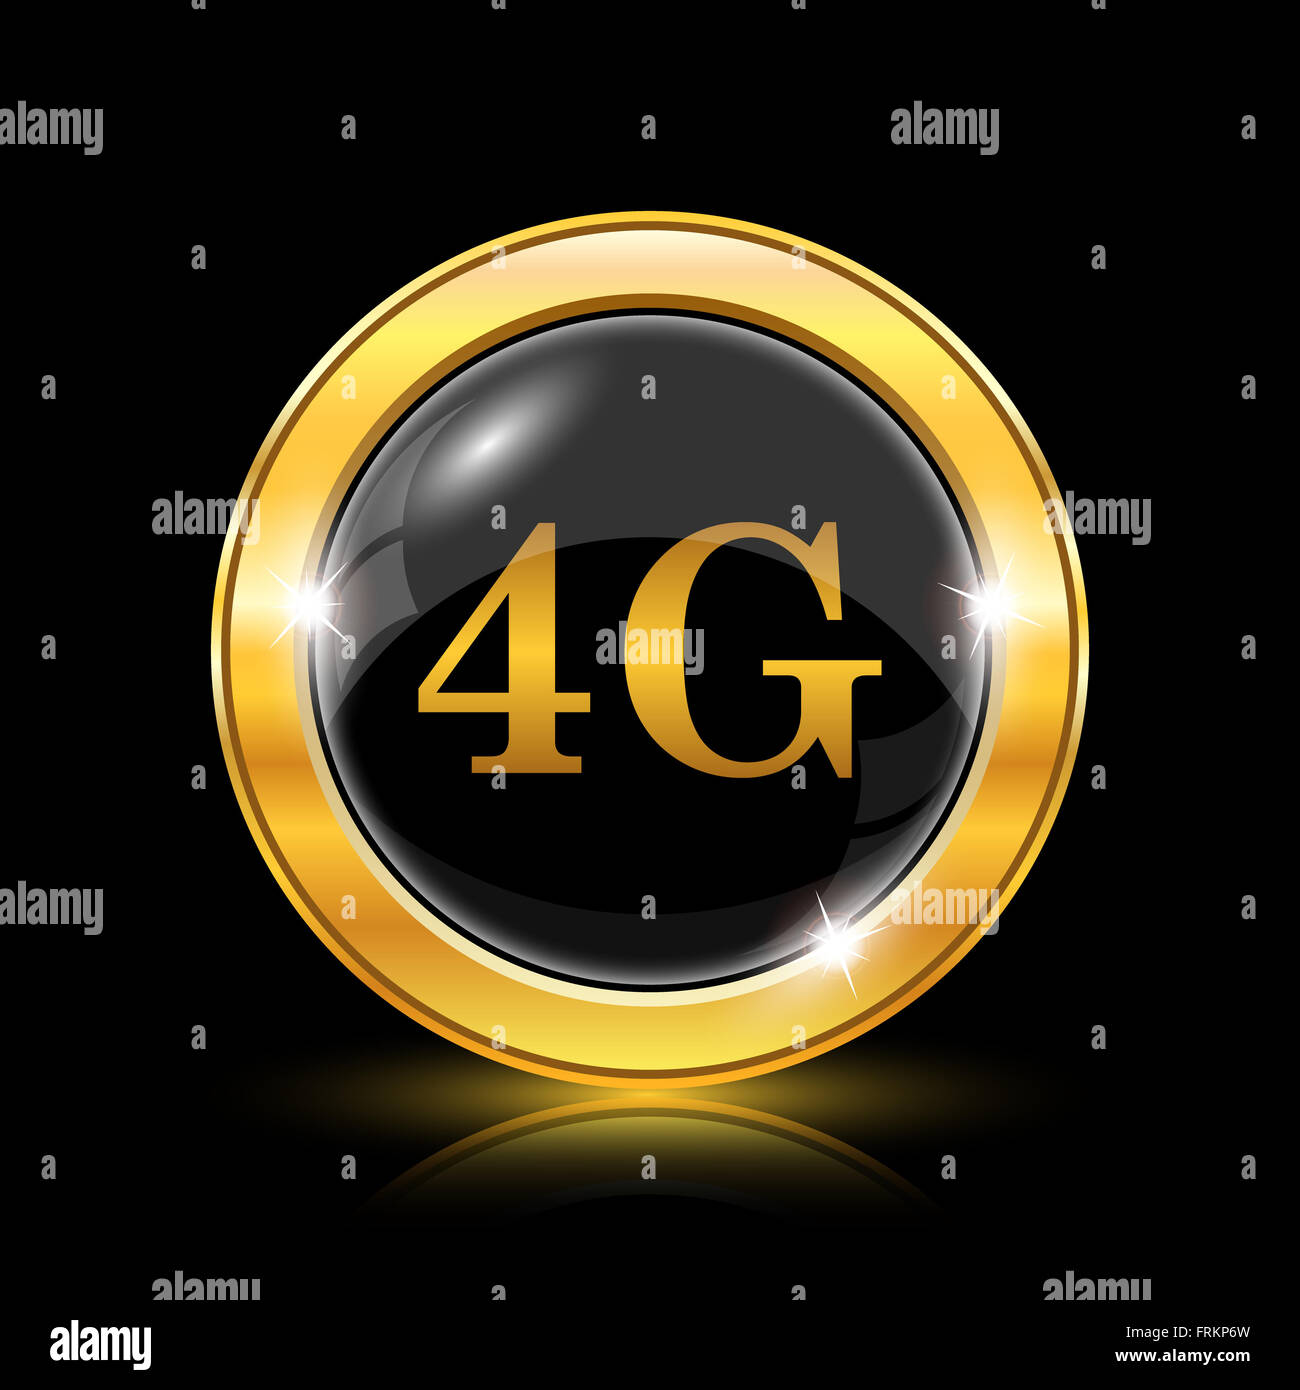 Cell Phone sign. Pseudo 3d embossed icon with - Stock Illustration  [80499121] - PIXTA